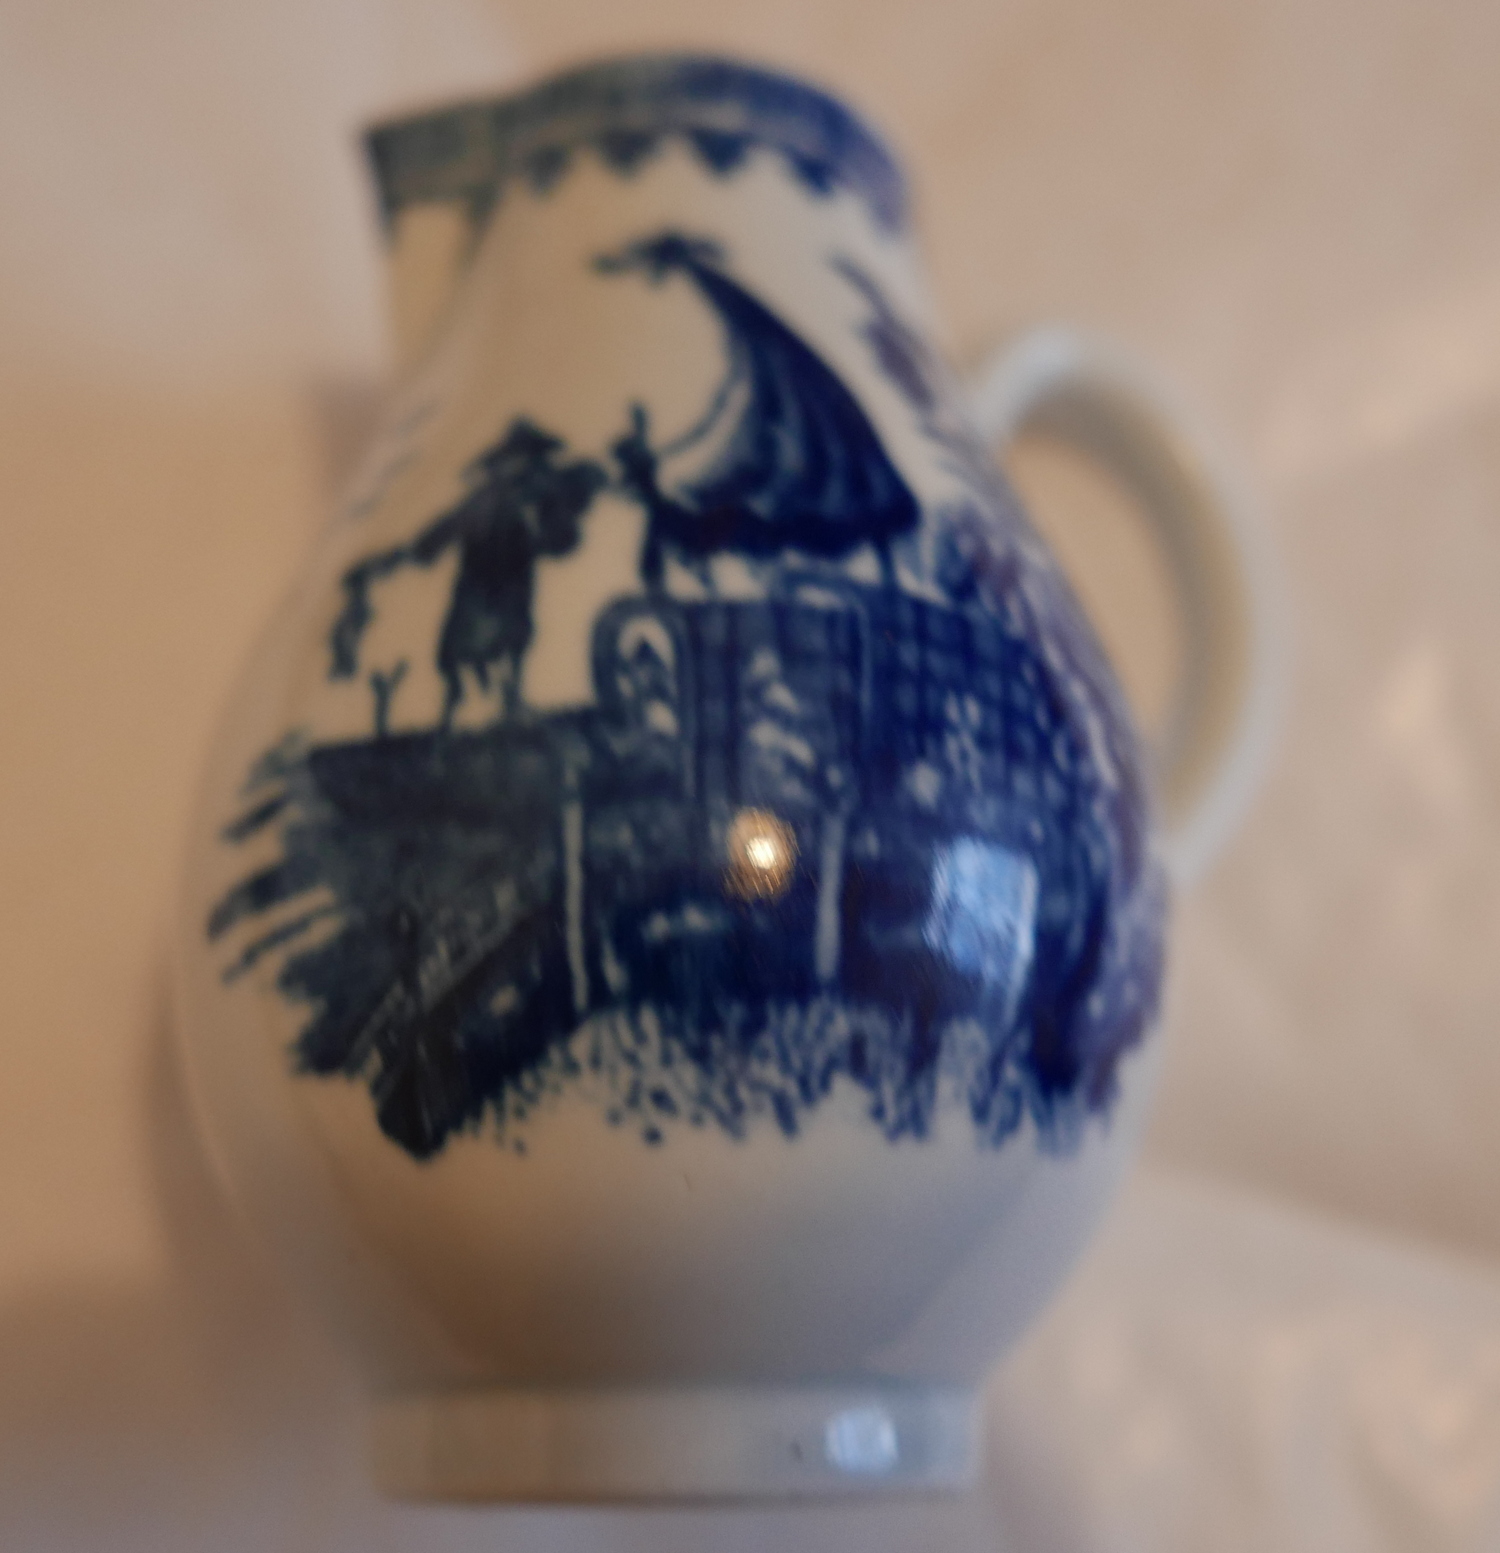 Antique 18th Century English Porcelain Sparrow Beak Jug 3 1/2" tall - excellent cond. - Image 6 of 7